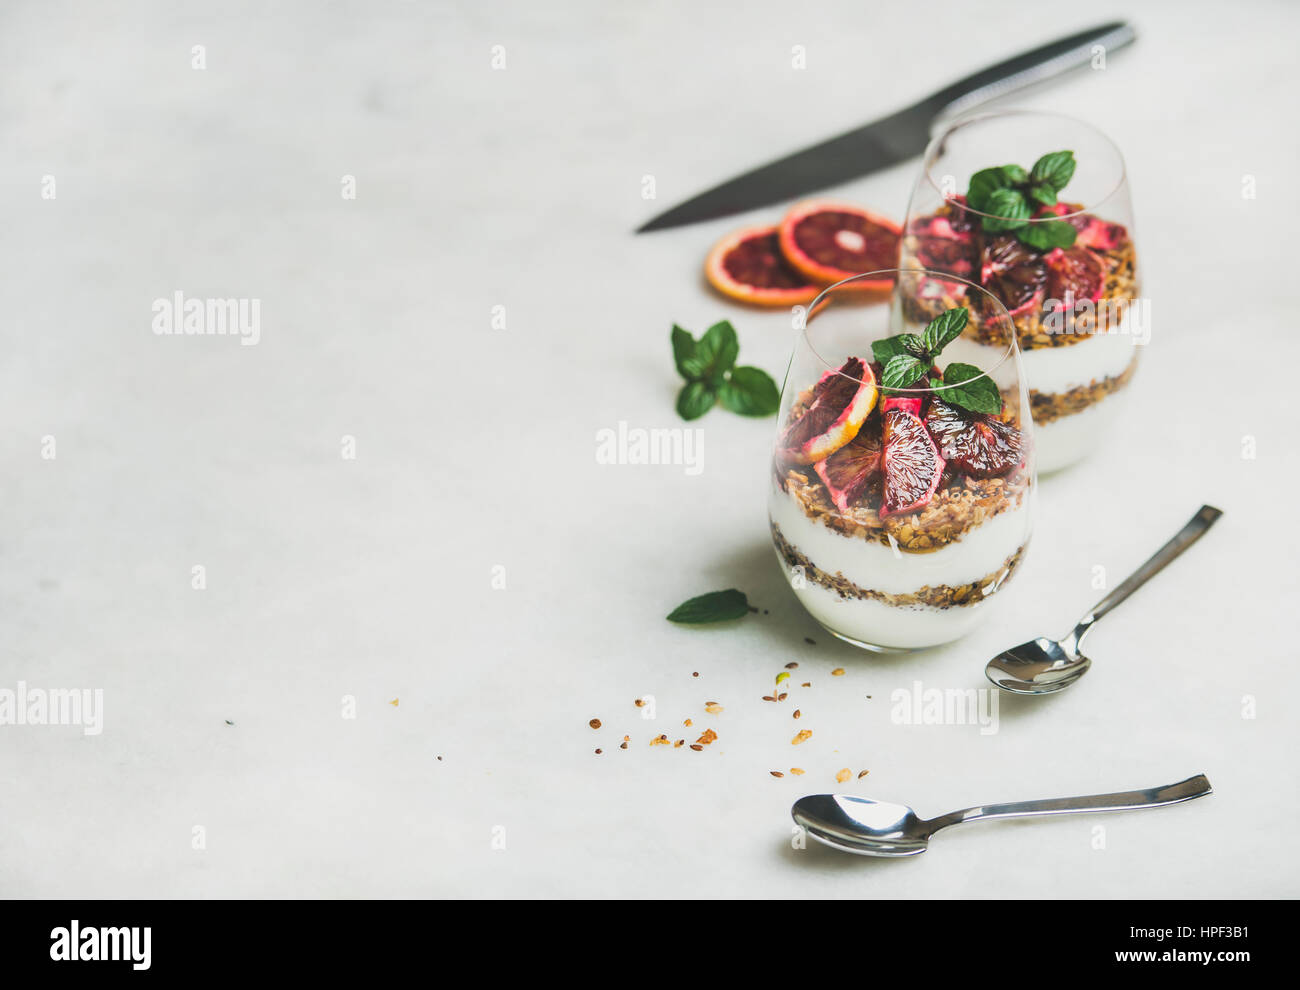 Healthy breakfast. Greek yogurt, granola and blood orange layered parfait in glasses with mint leaves over grey marble background, copy space. Clean e Stock Photo